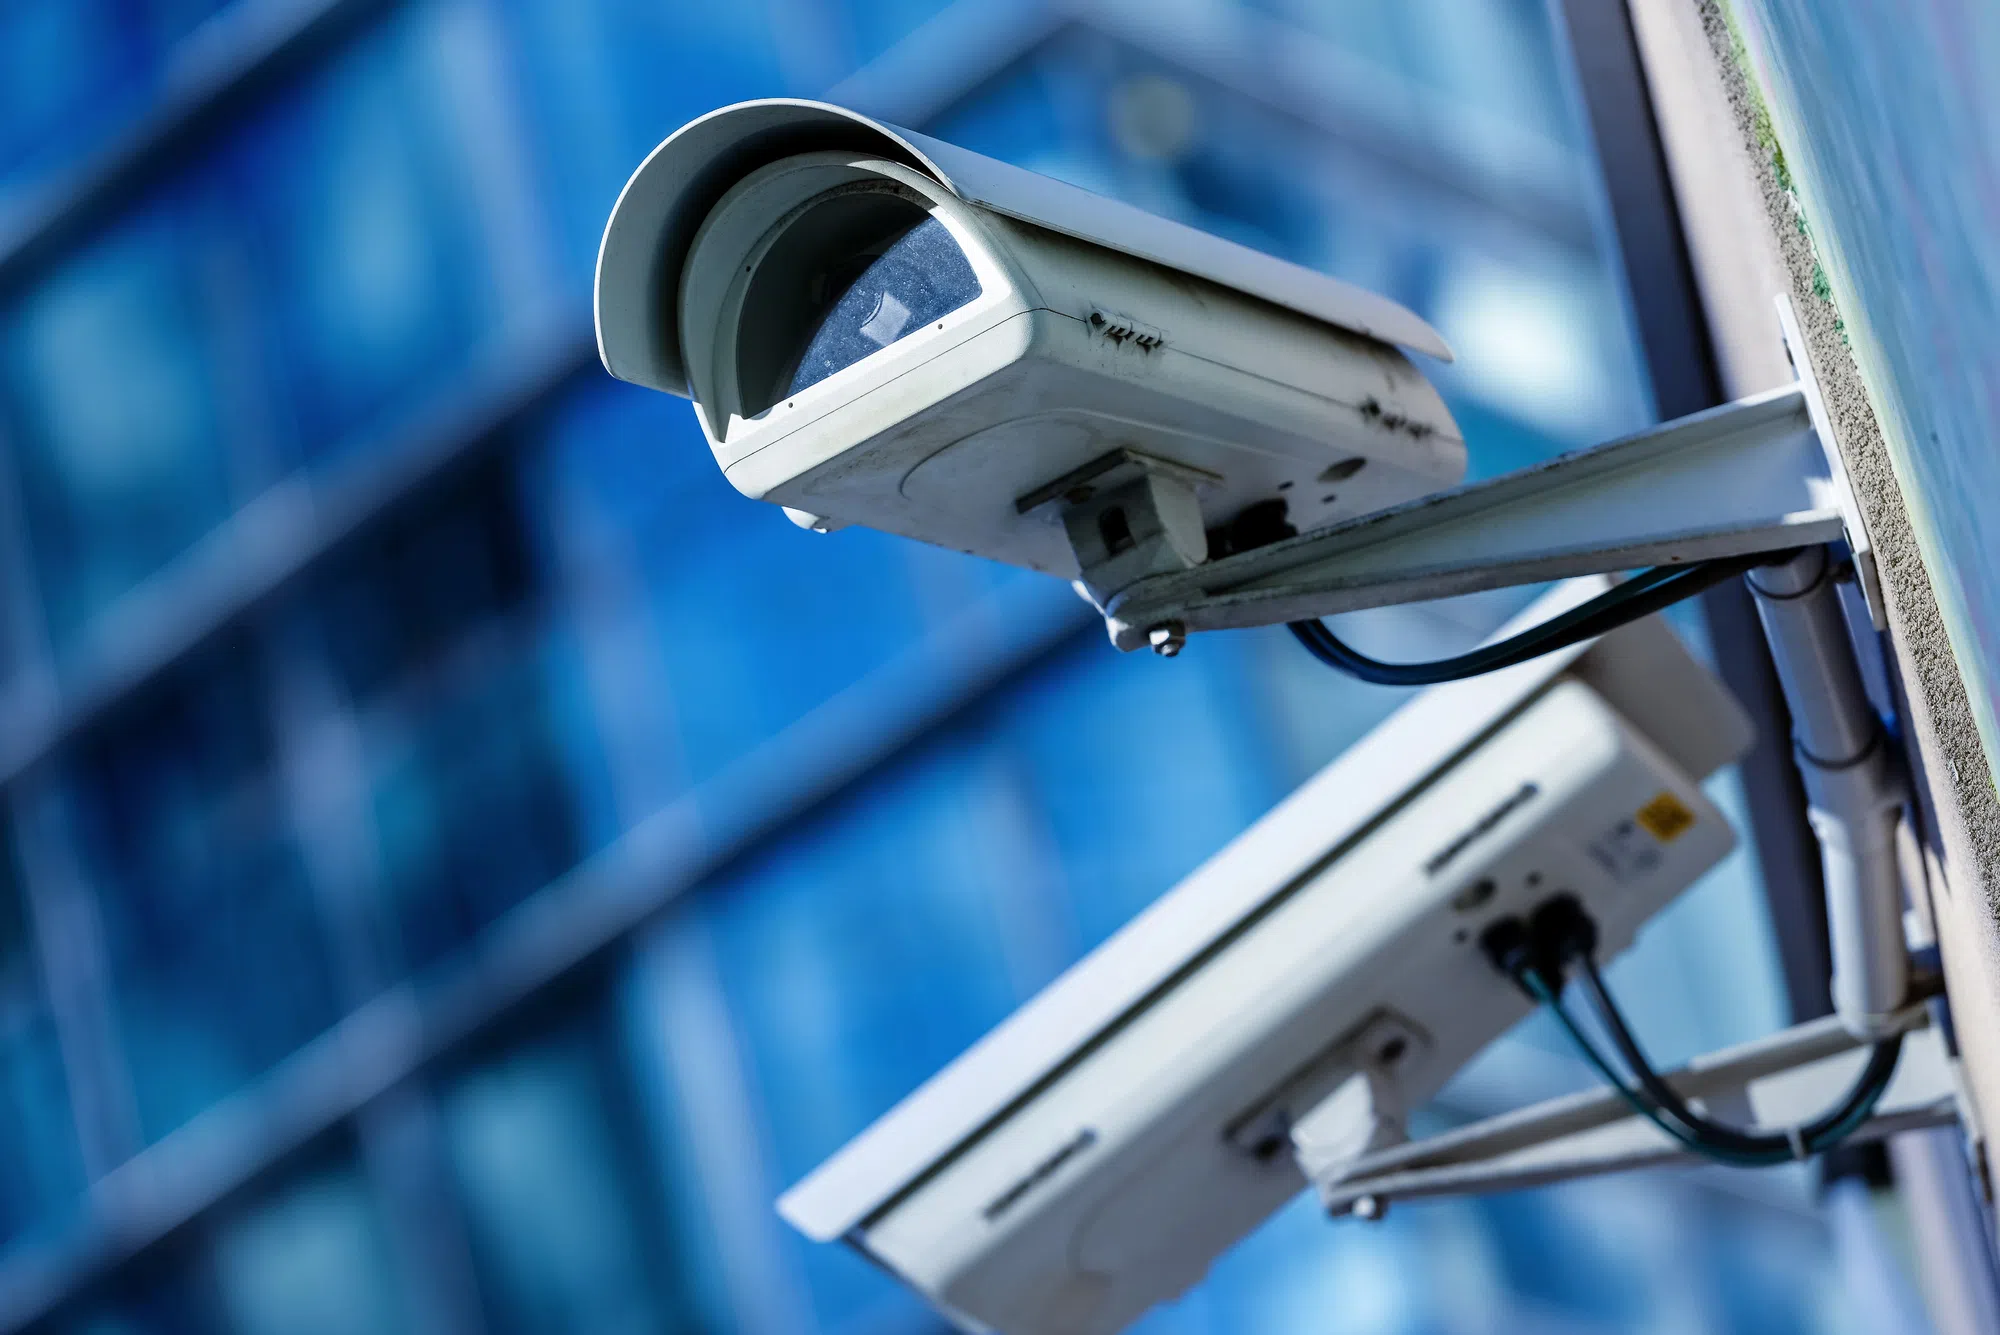 Prince Edward County approves security camera policy